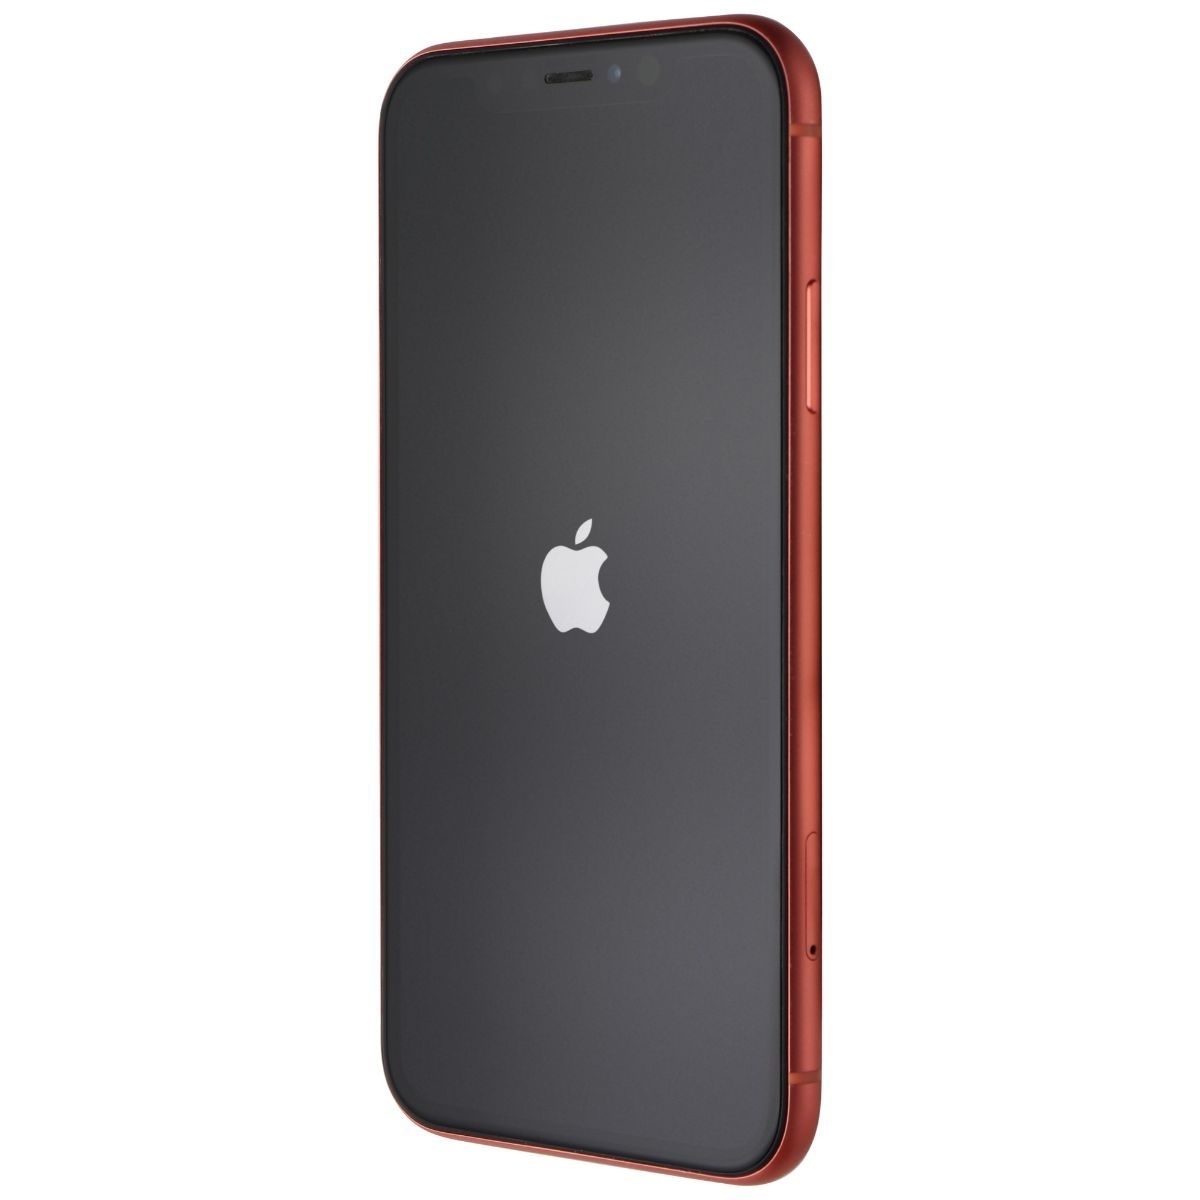 Apple IPhone XR (6.1-inch) (A1984) Unlocked - 64GB / Coral - Bad Face ID*